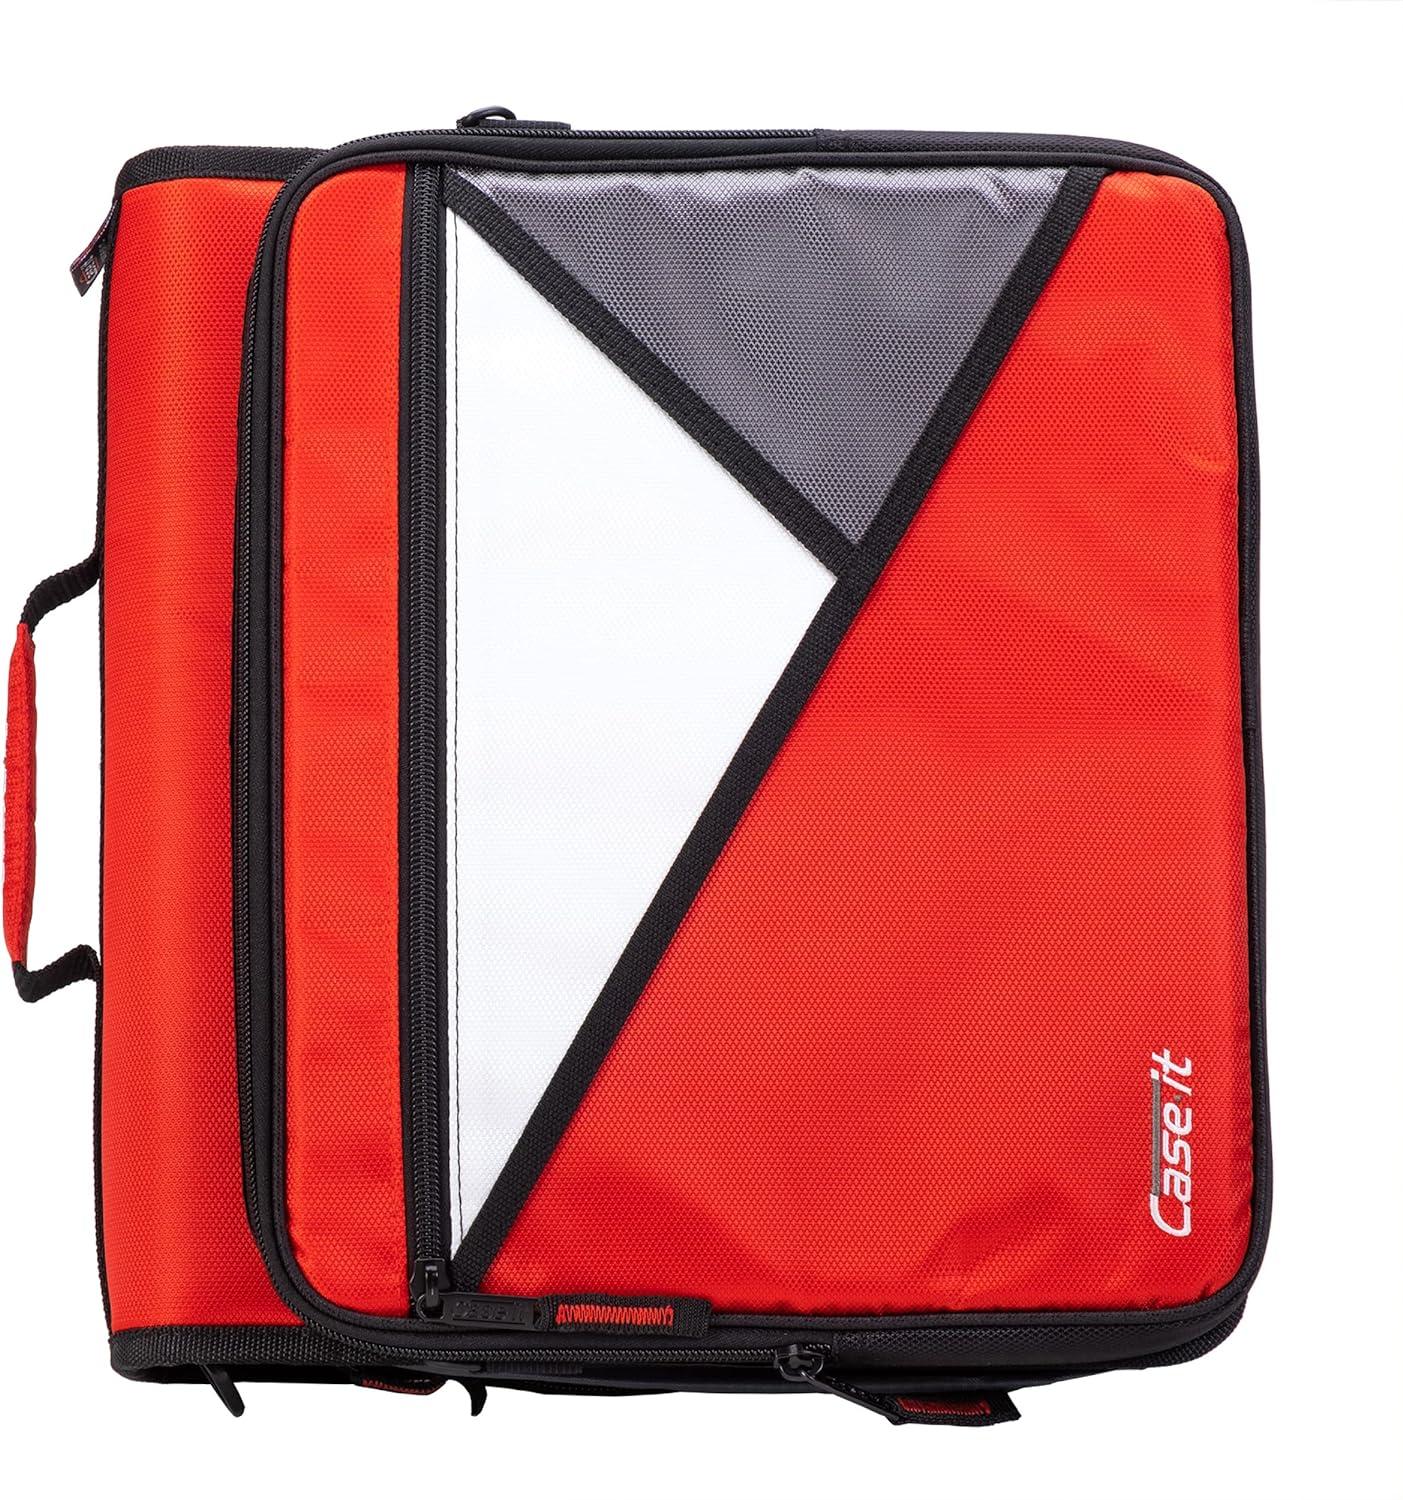 case-it the universal 2 0 zipper binder -1 5 inch o-ring - removable padded pocket holds up to 13